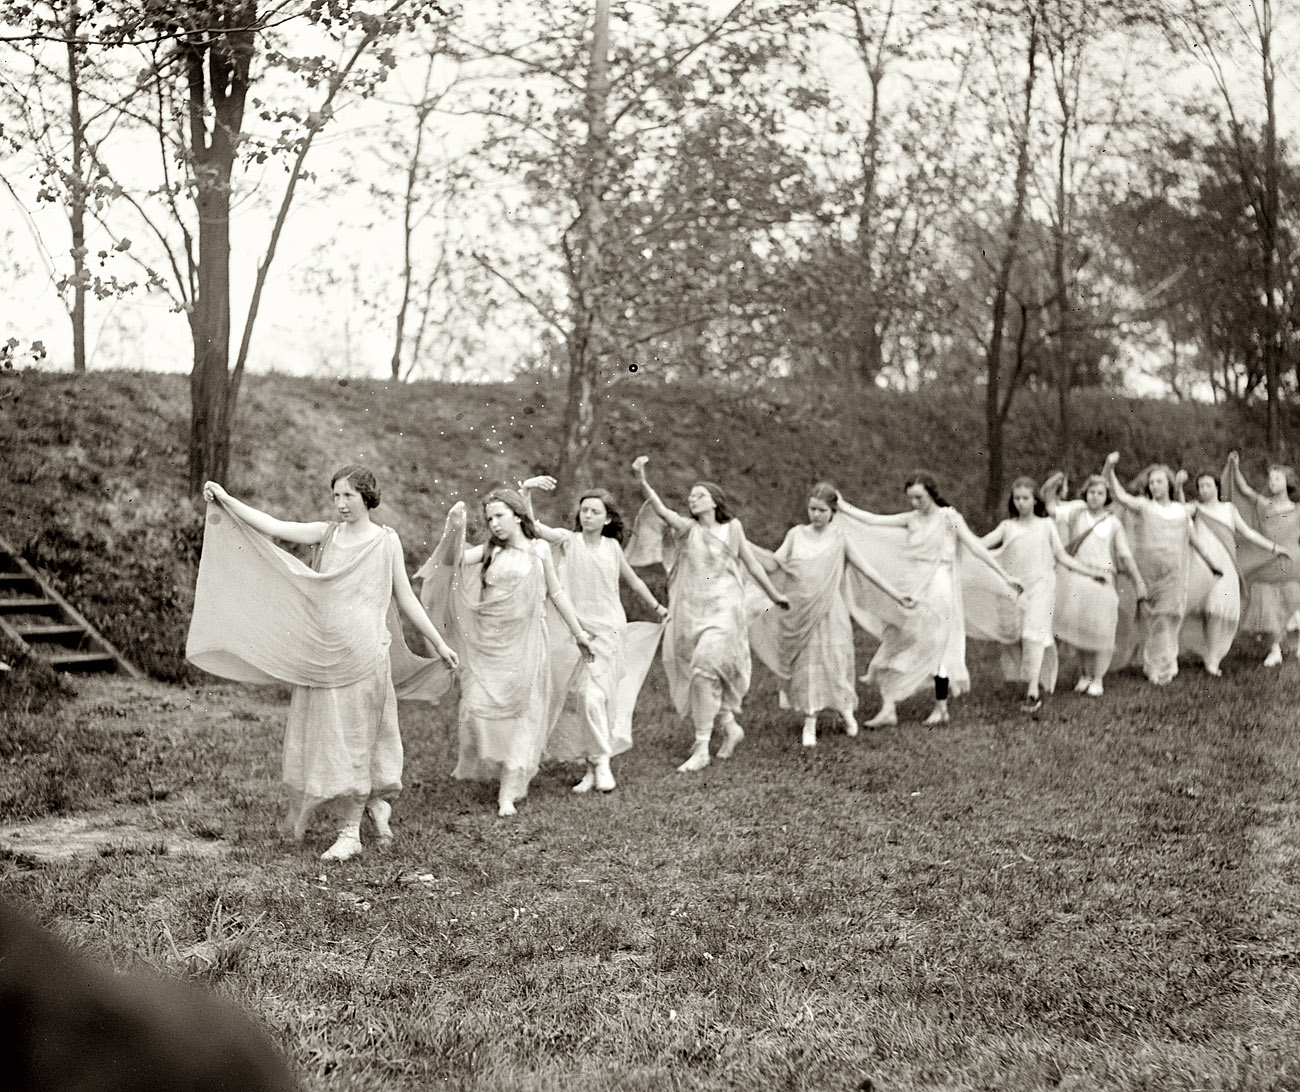 May 17, 1920. Washington, D.C. "Friends Select School, May festival." National Photo Company Collection glass negative. View full size.